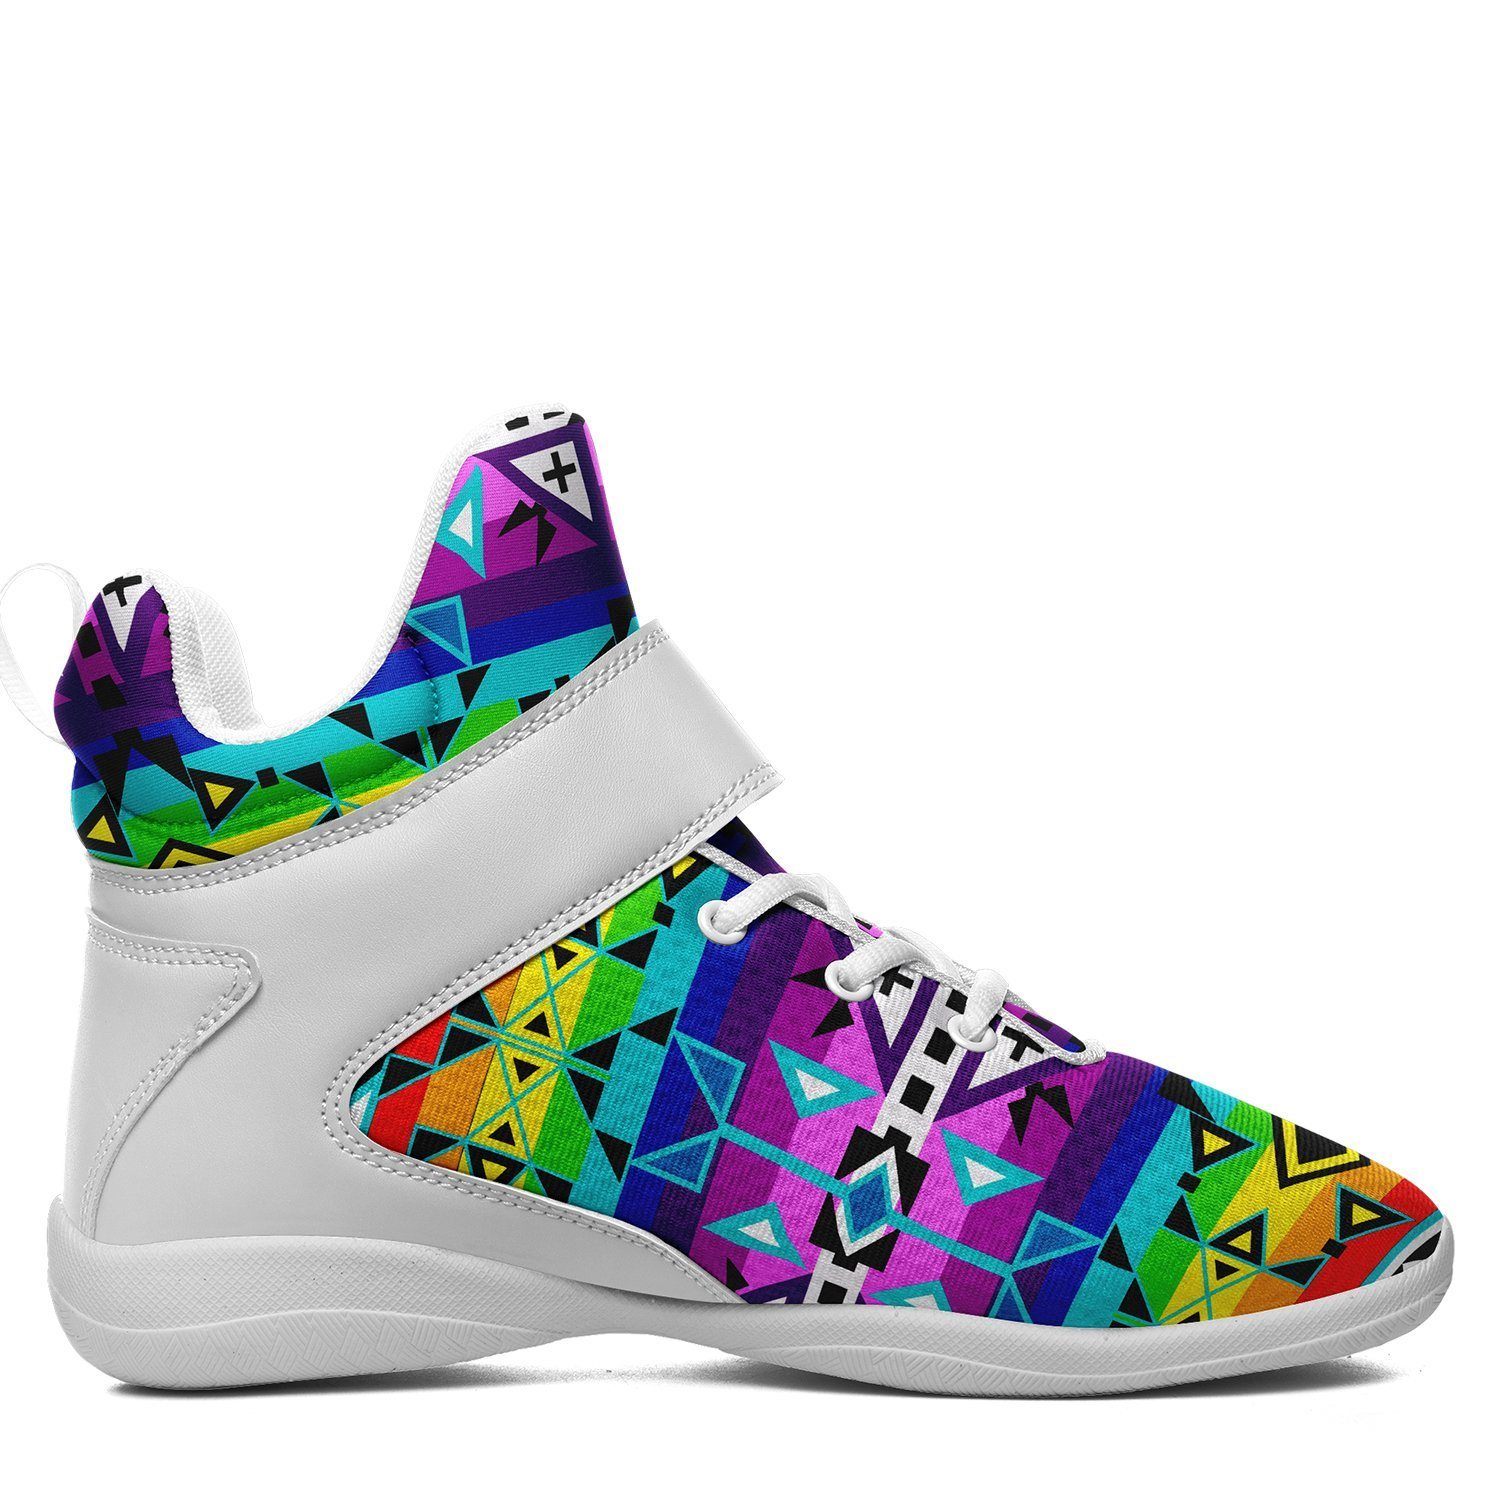 After the Rain Ipottaa Basketball / Sport High Top Shoes - White Sole 49 Dzine 